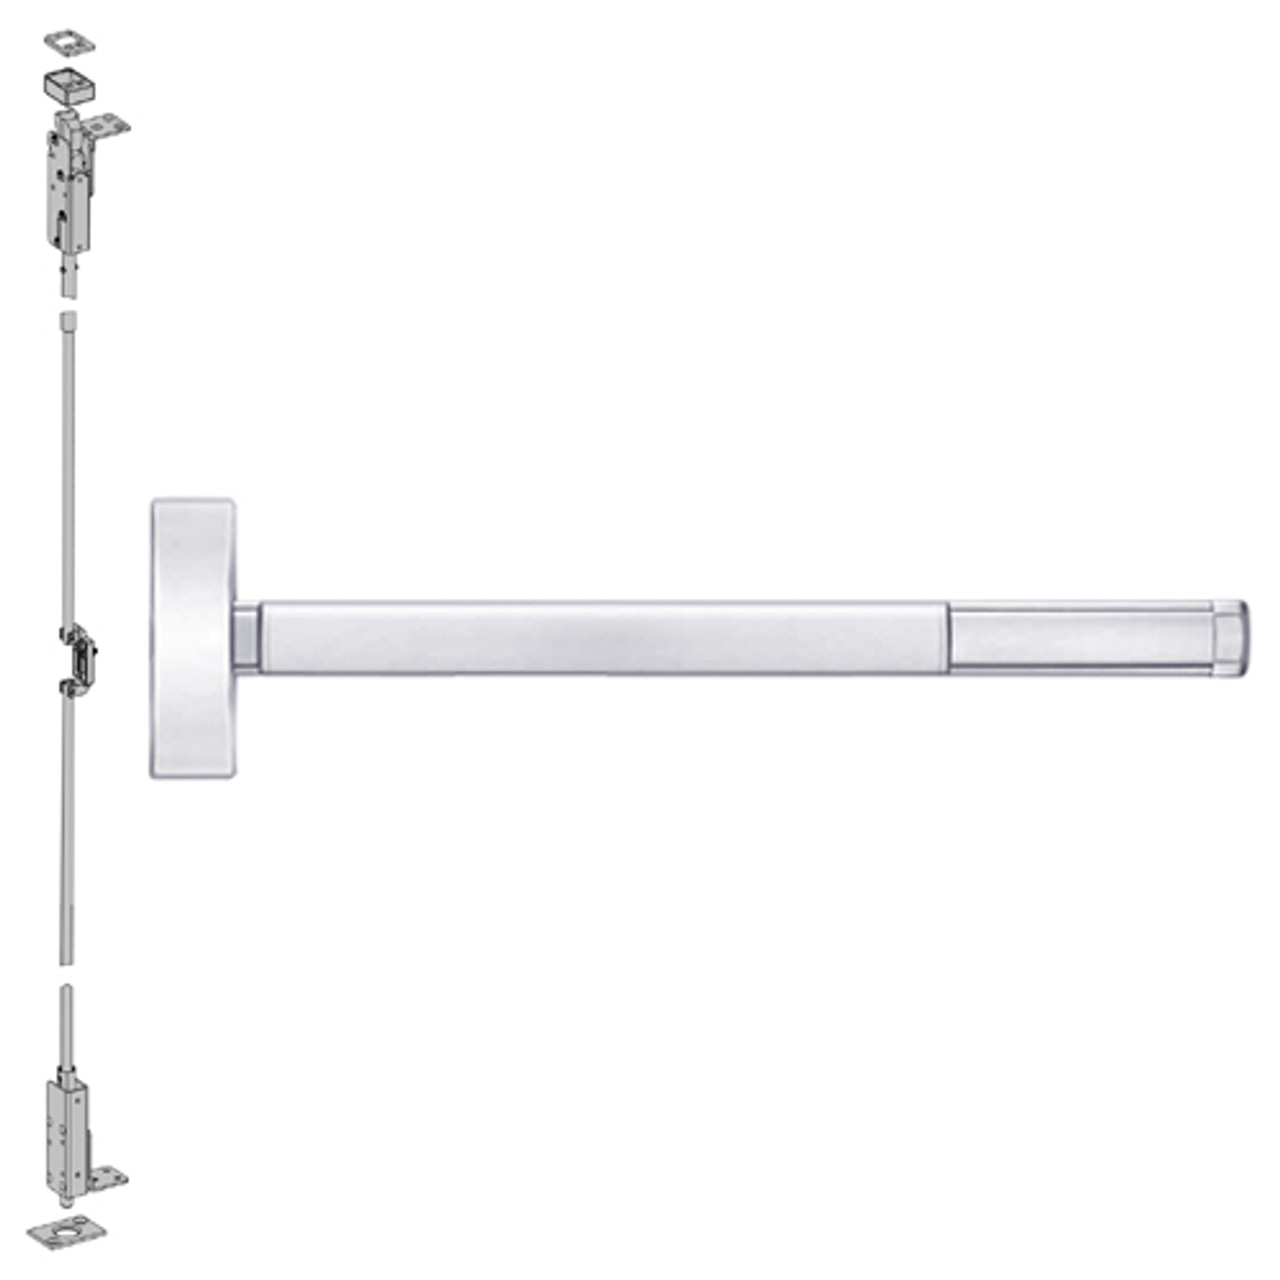 2705CD-625-36 PHI 2700 Series Wood Door Concealed Vertical Rod Device Prepped for Key Controls Thumb Piece with Cylinder Dogging in Bright Chrome Finish